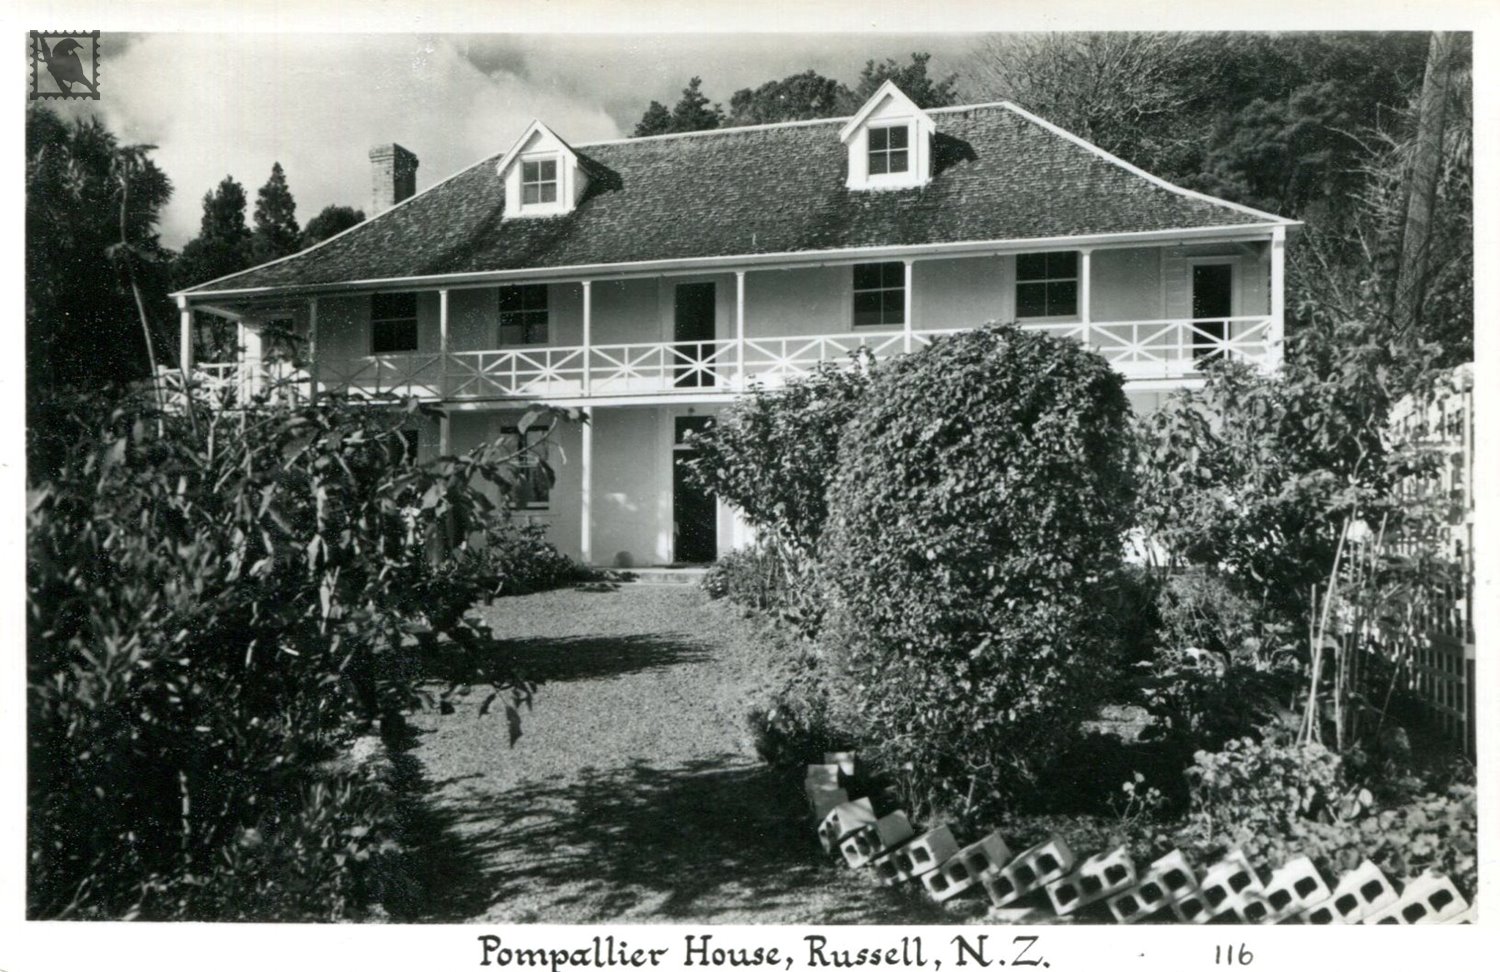 Russell Pompallier House